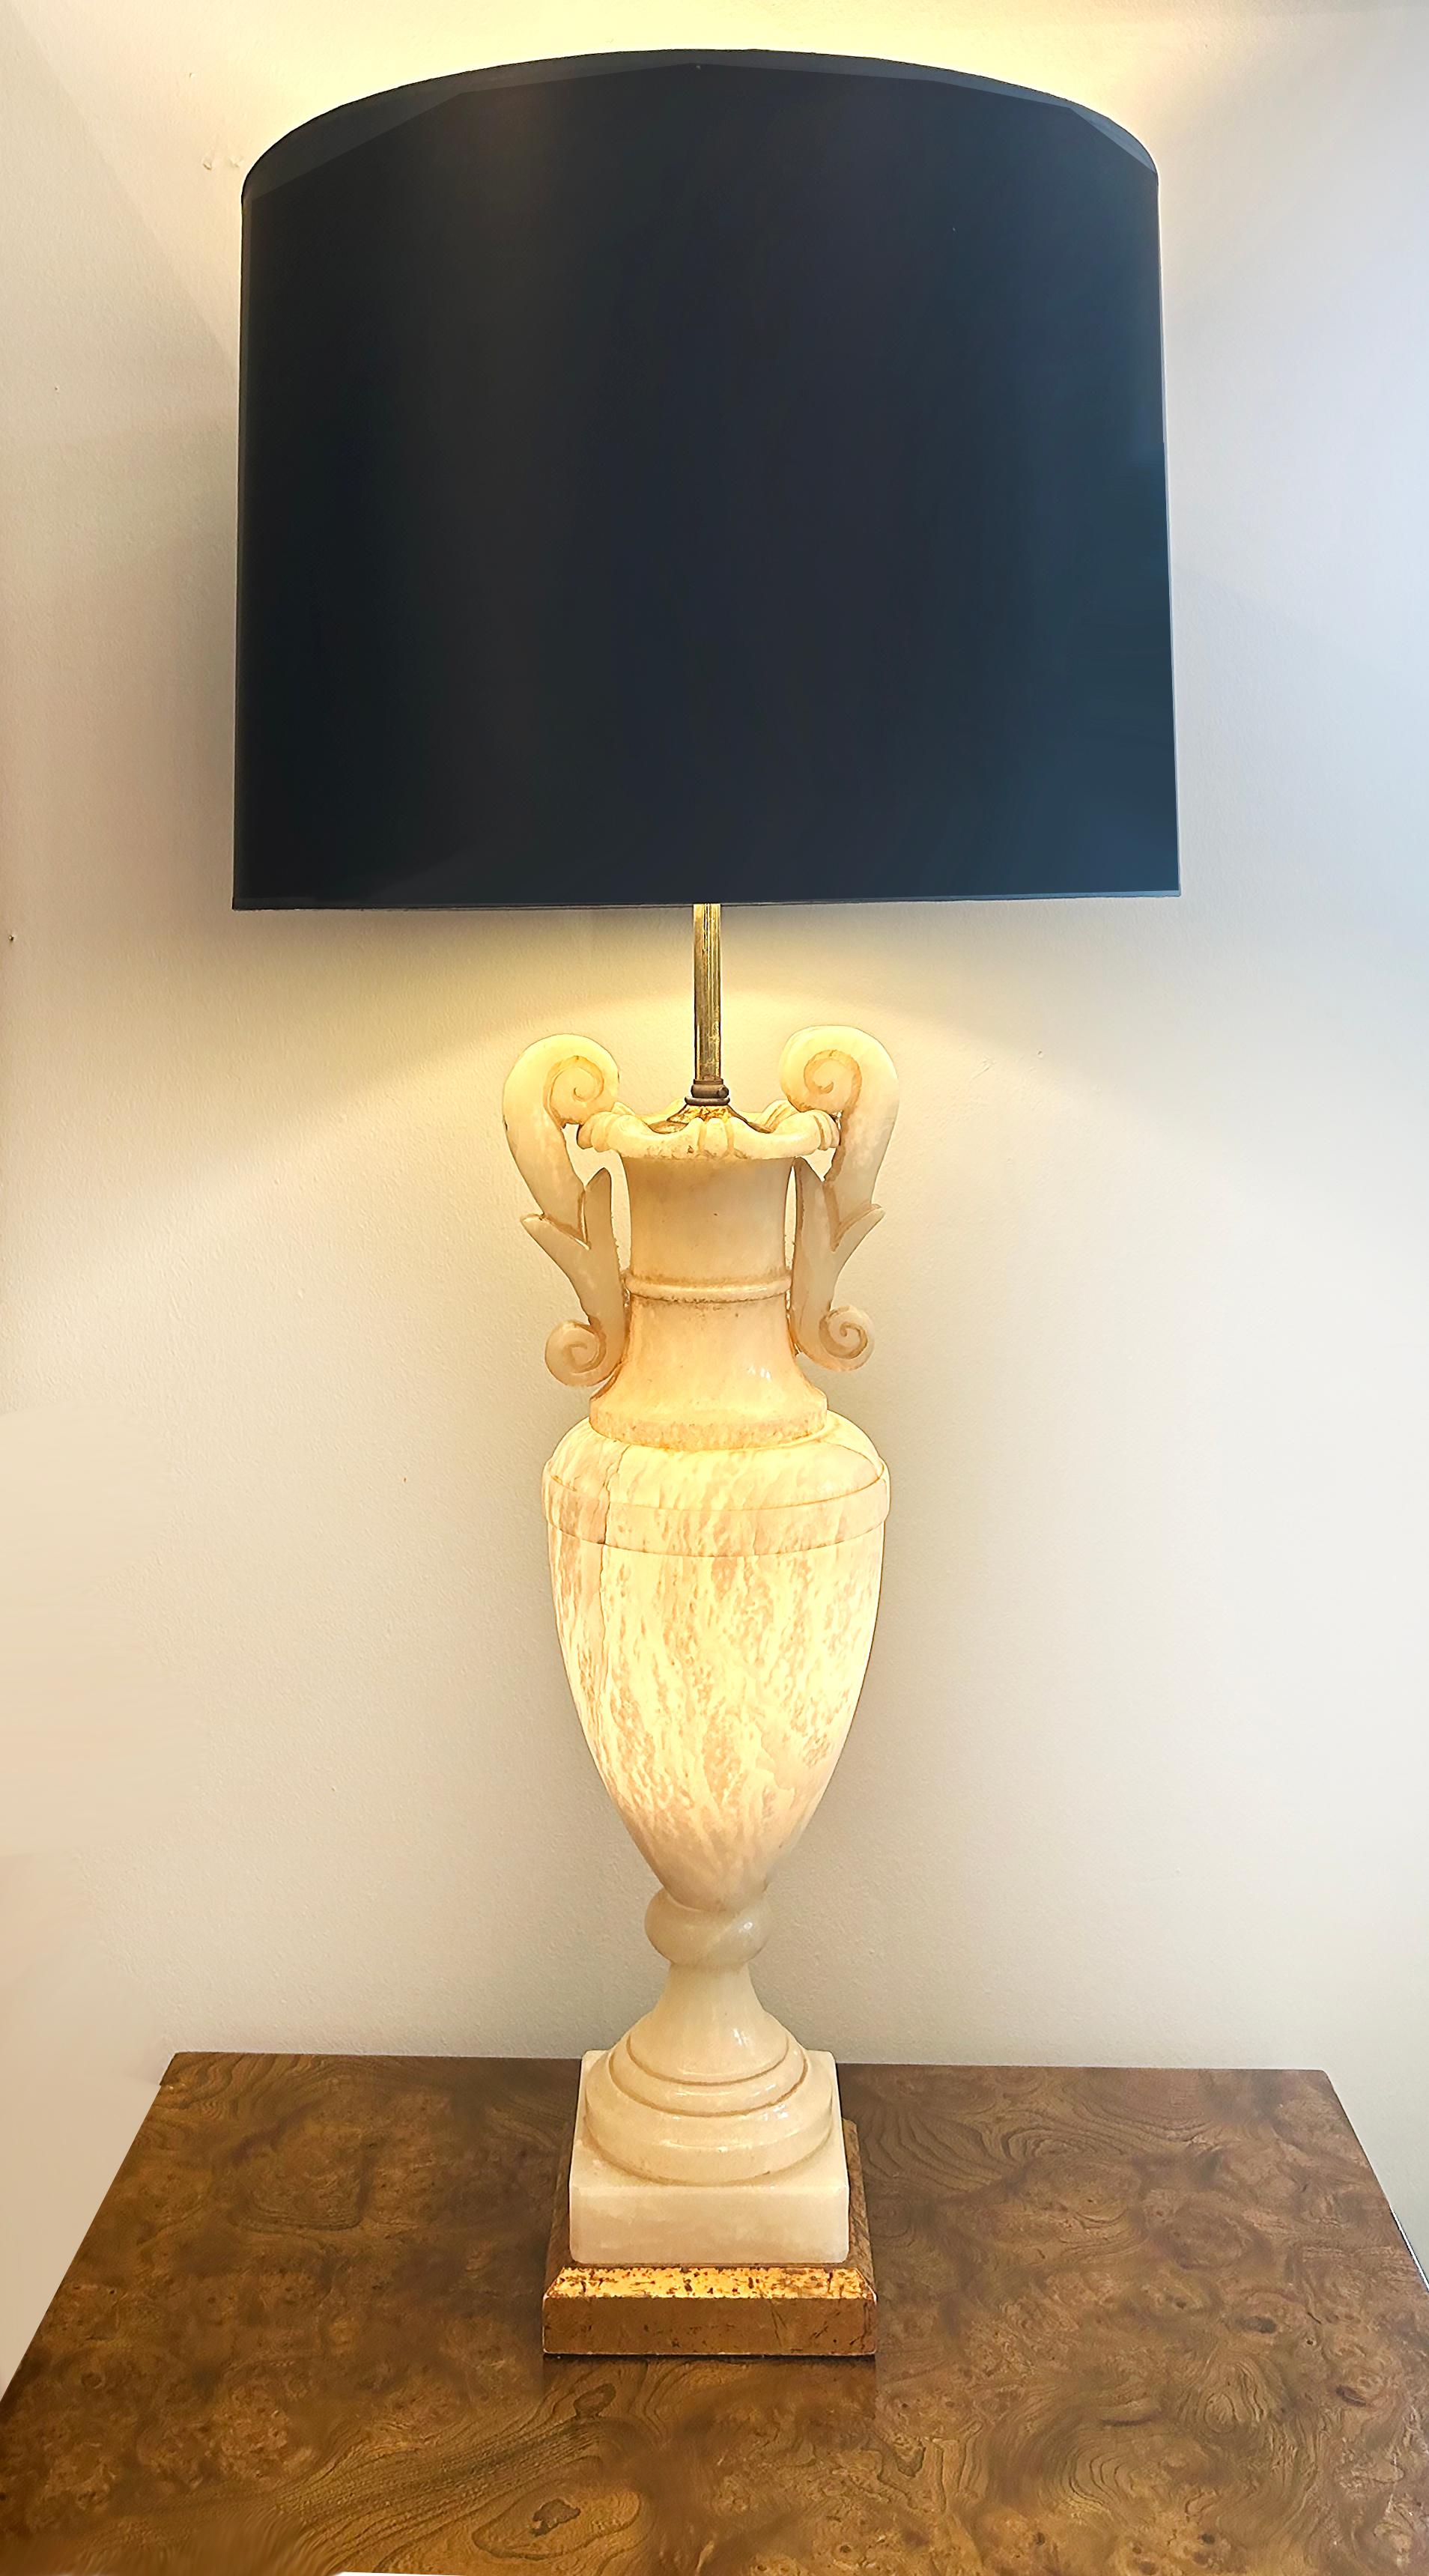 Monumental Alabaster Urn Table Lamps with Interior Lighting, Wired and Working

Offered for sale is a large pair of impressive monumental alabaster urns mounted as lamps.  These lamps are wired with single sockets which accommodate standard bulbs.